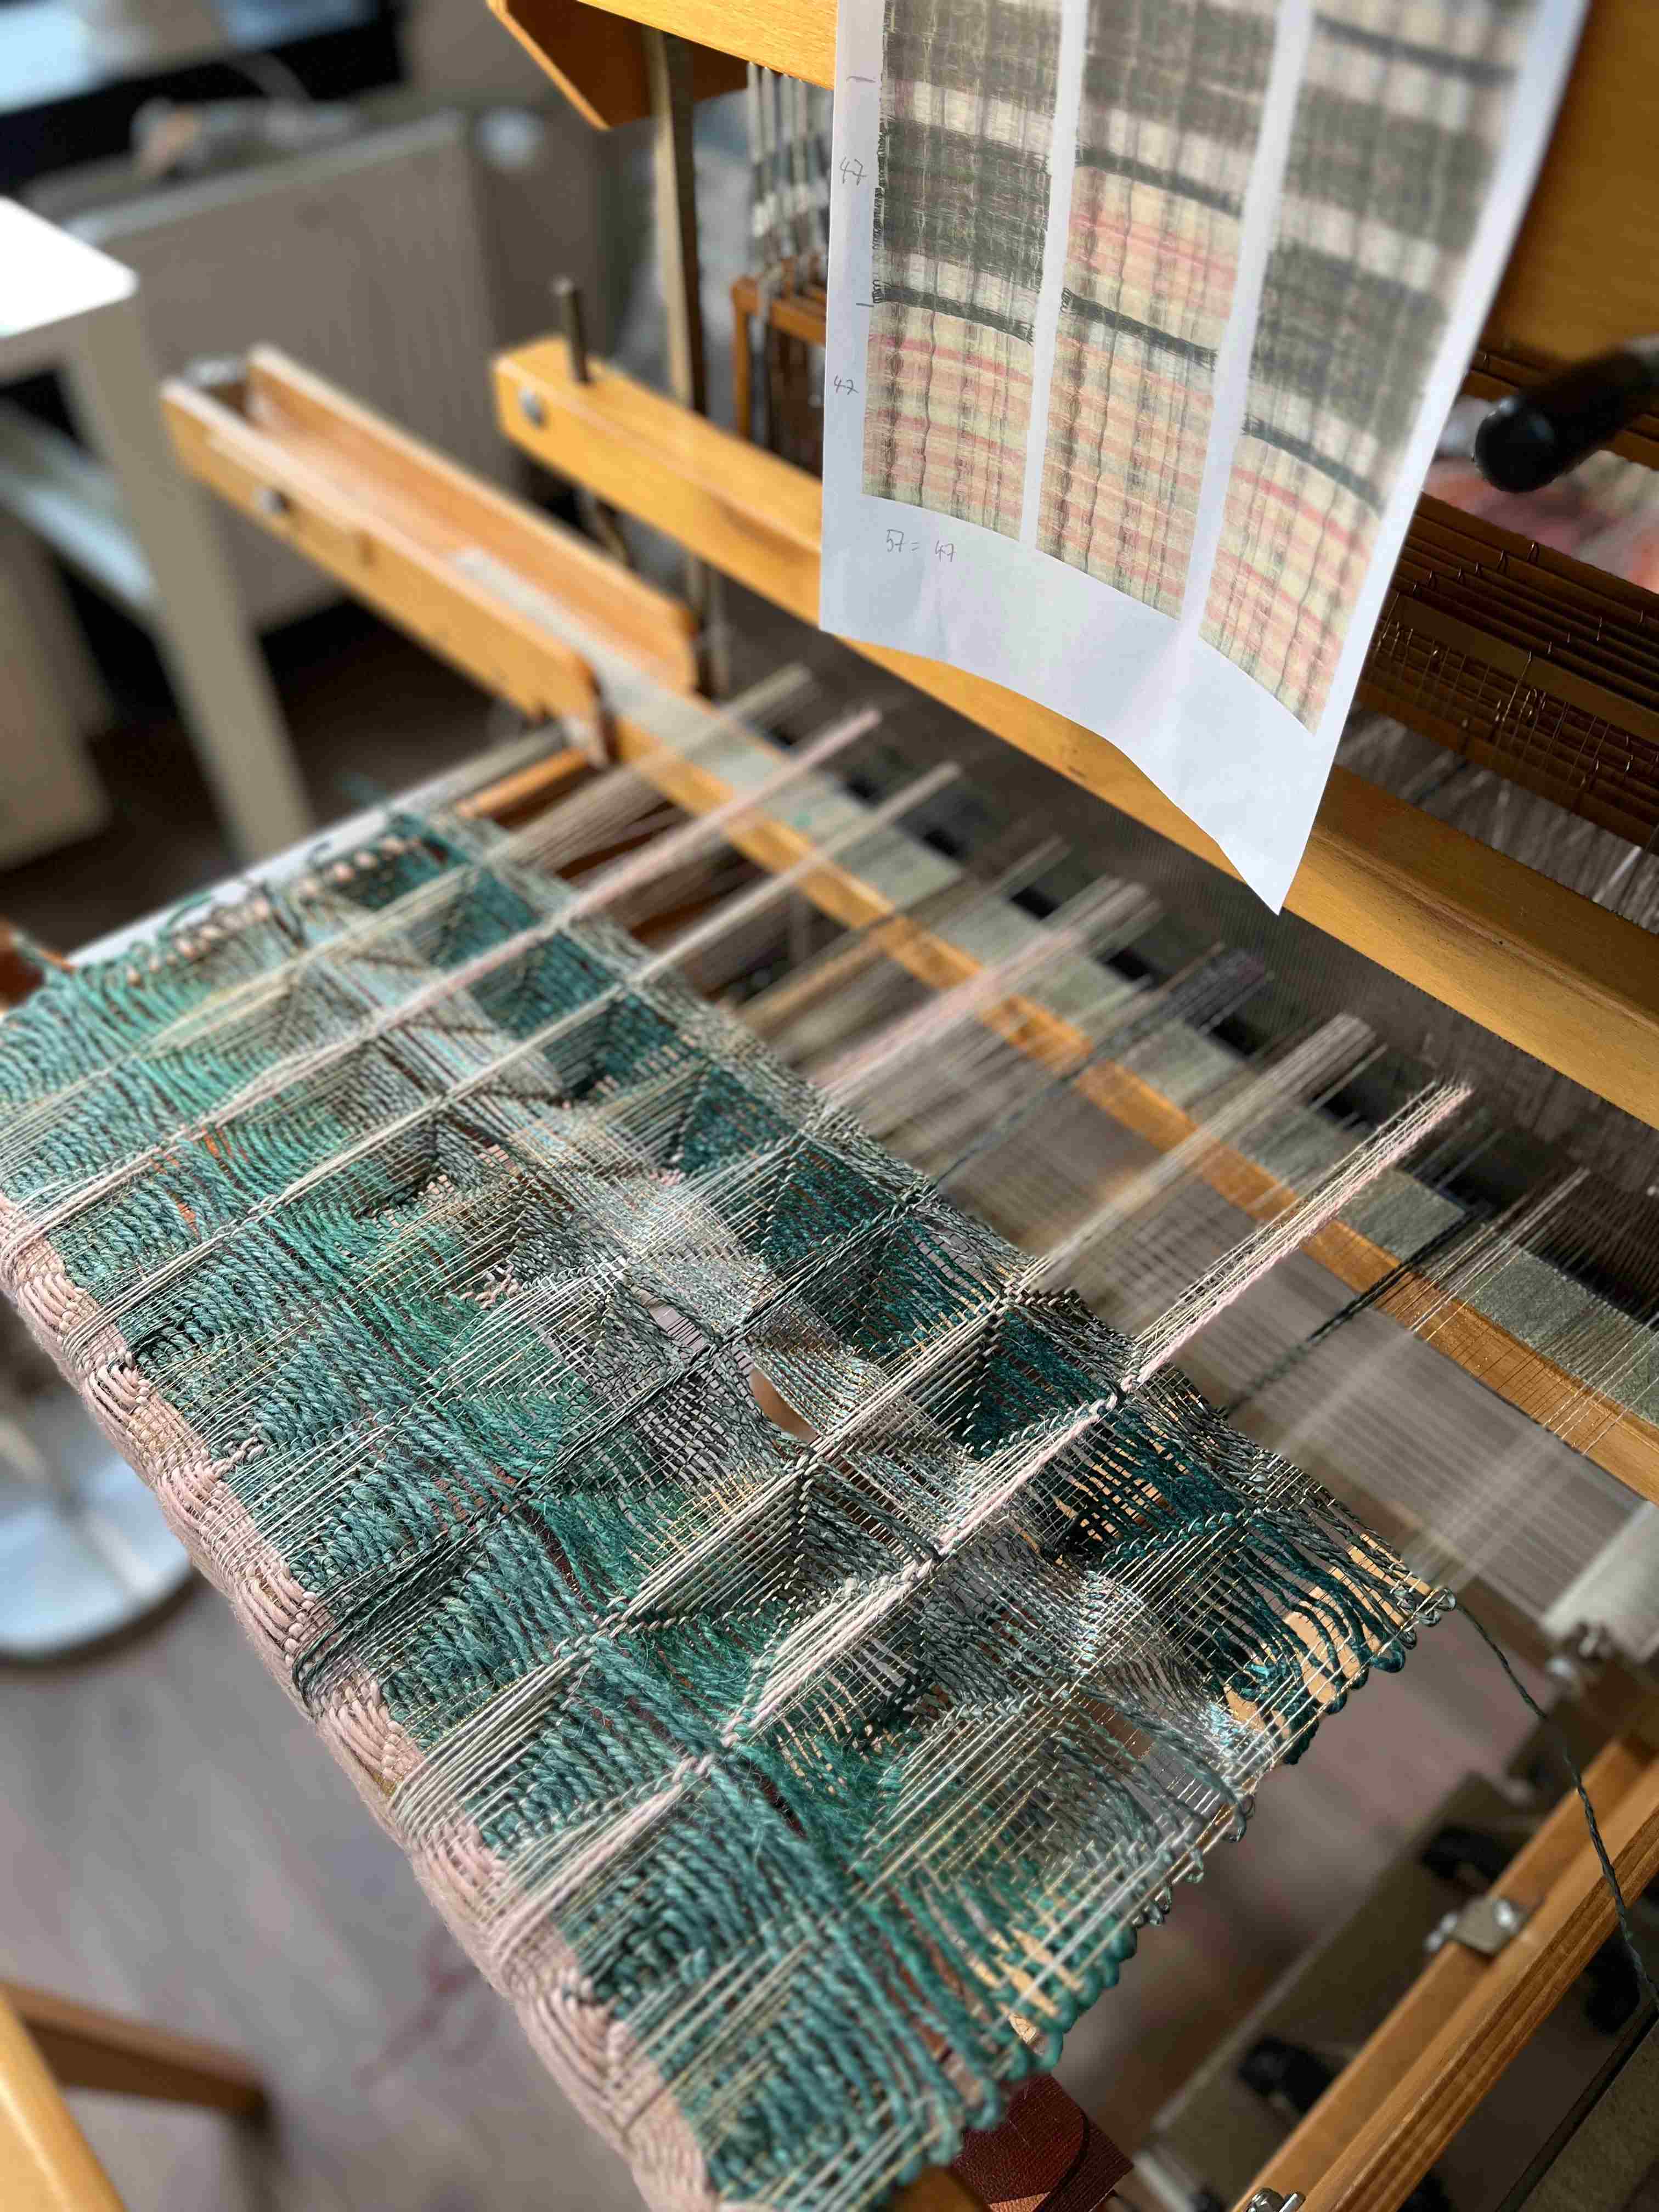 Weaving of wall hanging in progress on the loom